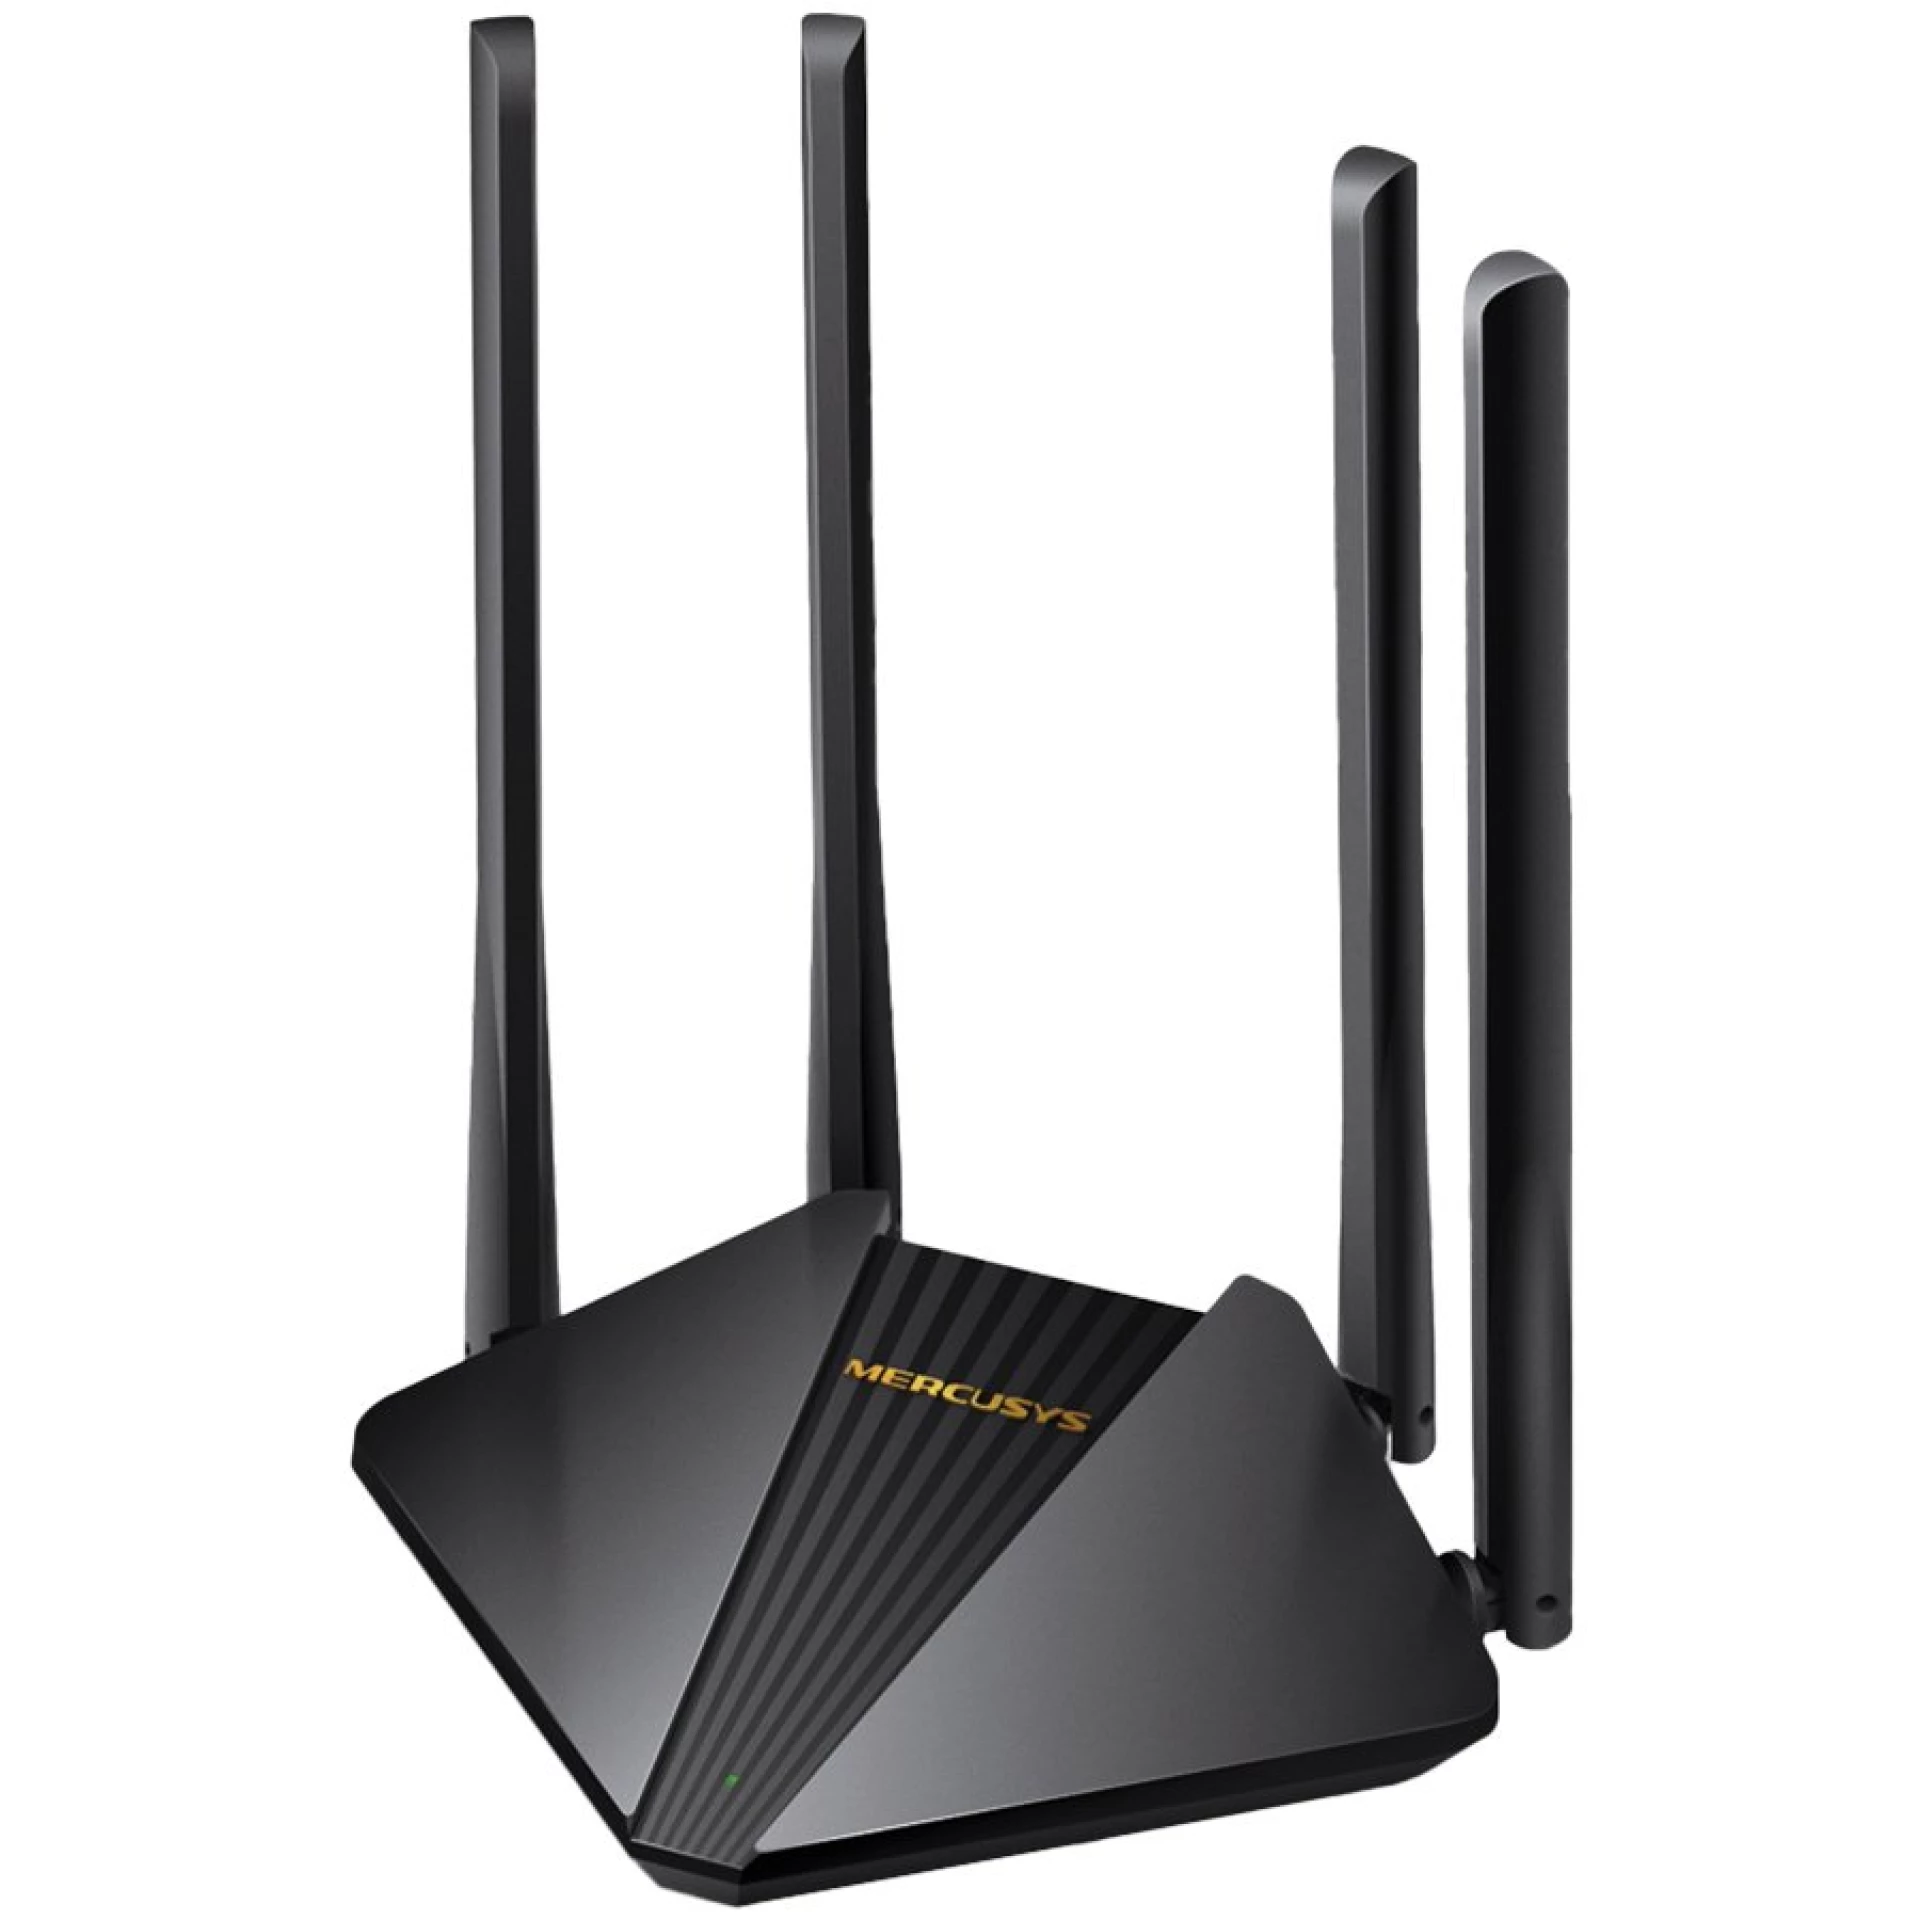 AC1200 Dual-Band Wi-Fi Gigabit RouterSPEED: 300 Mbps at 2.4 GHz + 867 Mbps at 5 GHz SPEC:  4× Fixed External Antennas, 2× Gigabit LAN Ports, 1× Gigabit WAN PortFEATURE: Router/Access Point Mode, WPS/Reset Button, IPTV, IPv6, Beamforming, MU-MIMO,